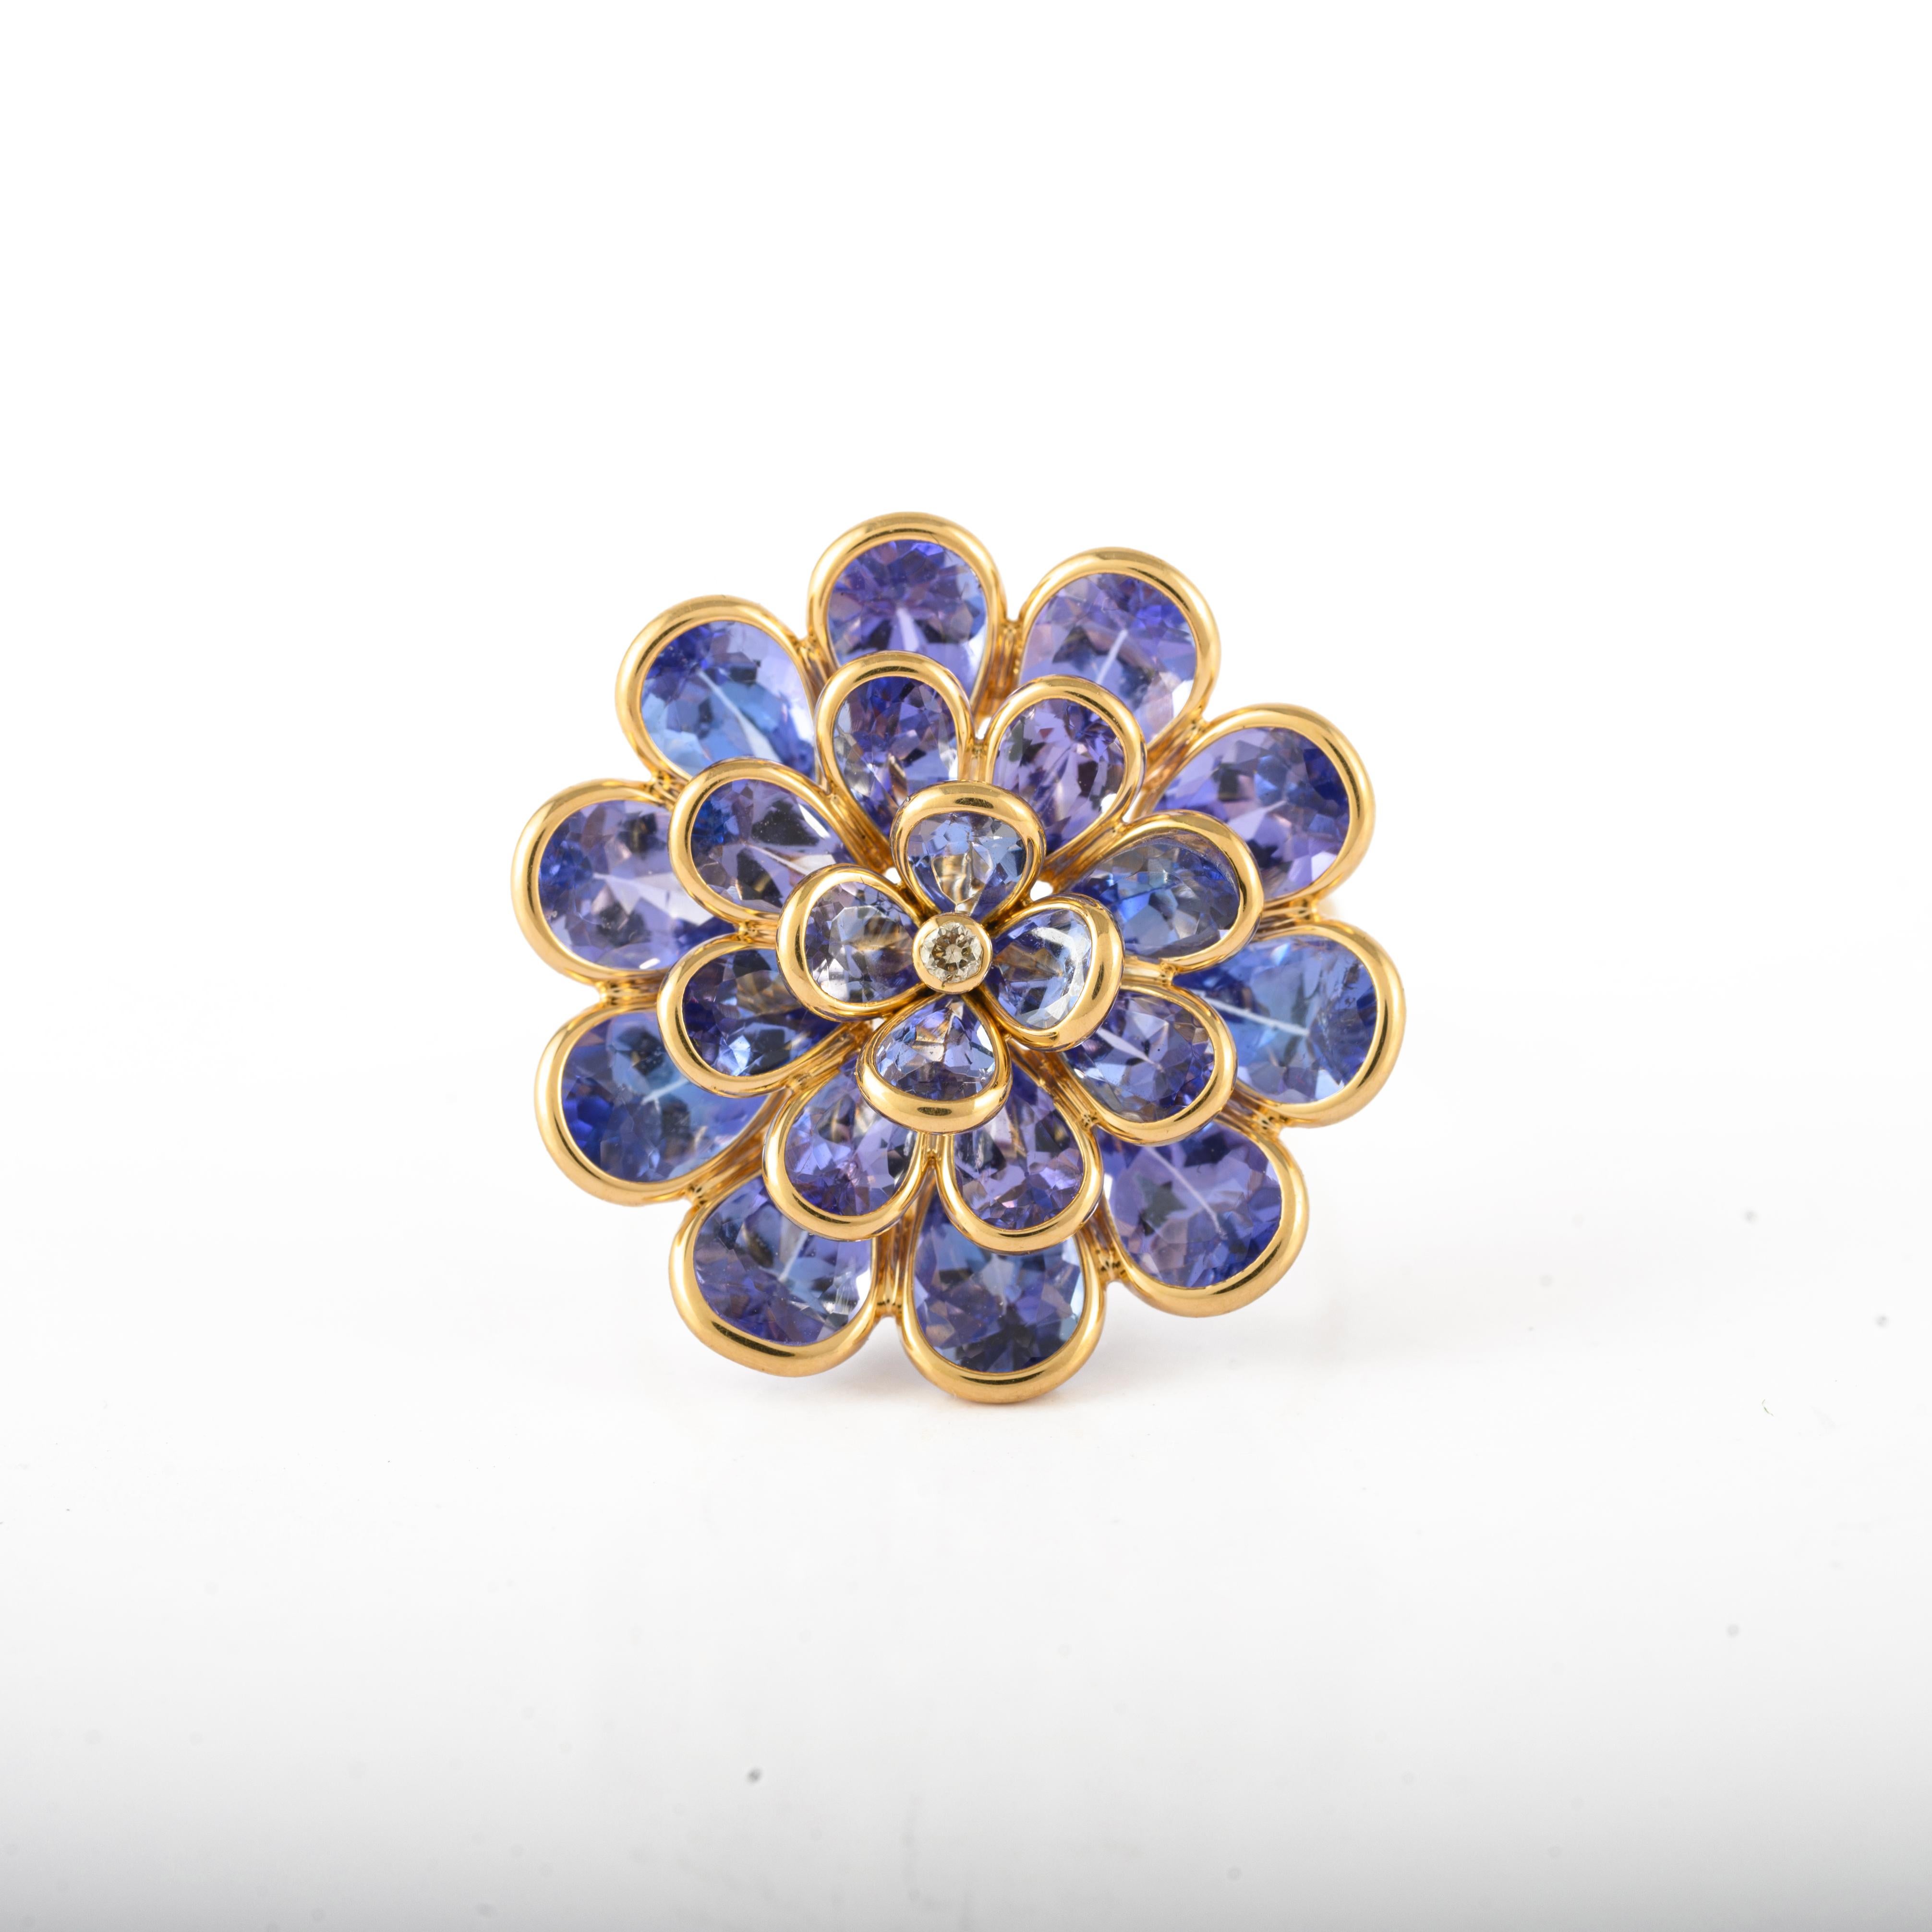 For Sale:  6.26ct Tanzanite Flower Ring with Diamond in 18k Solid Yellow Gold 2